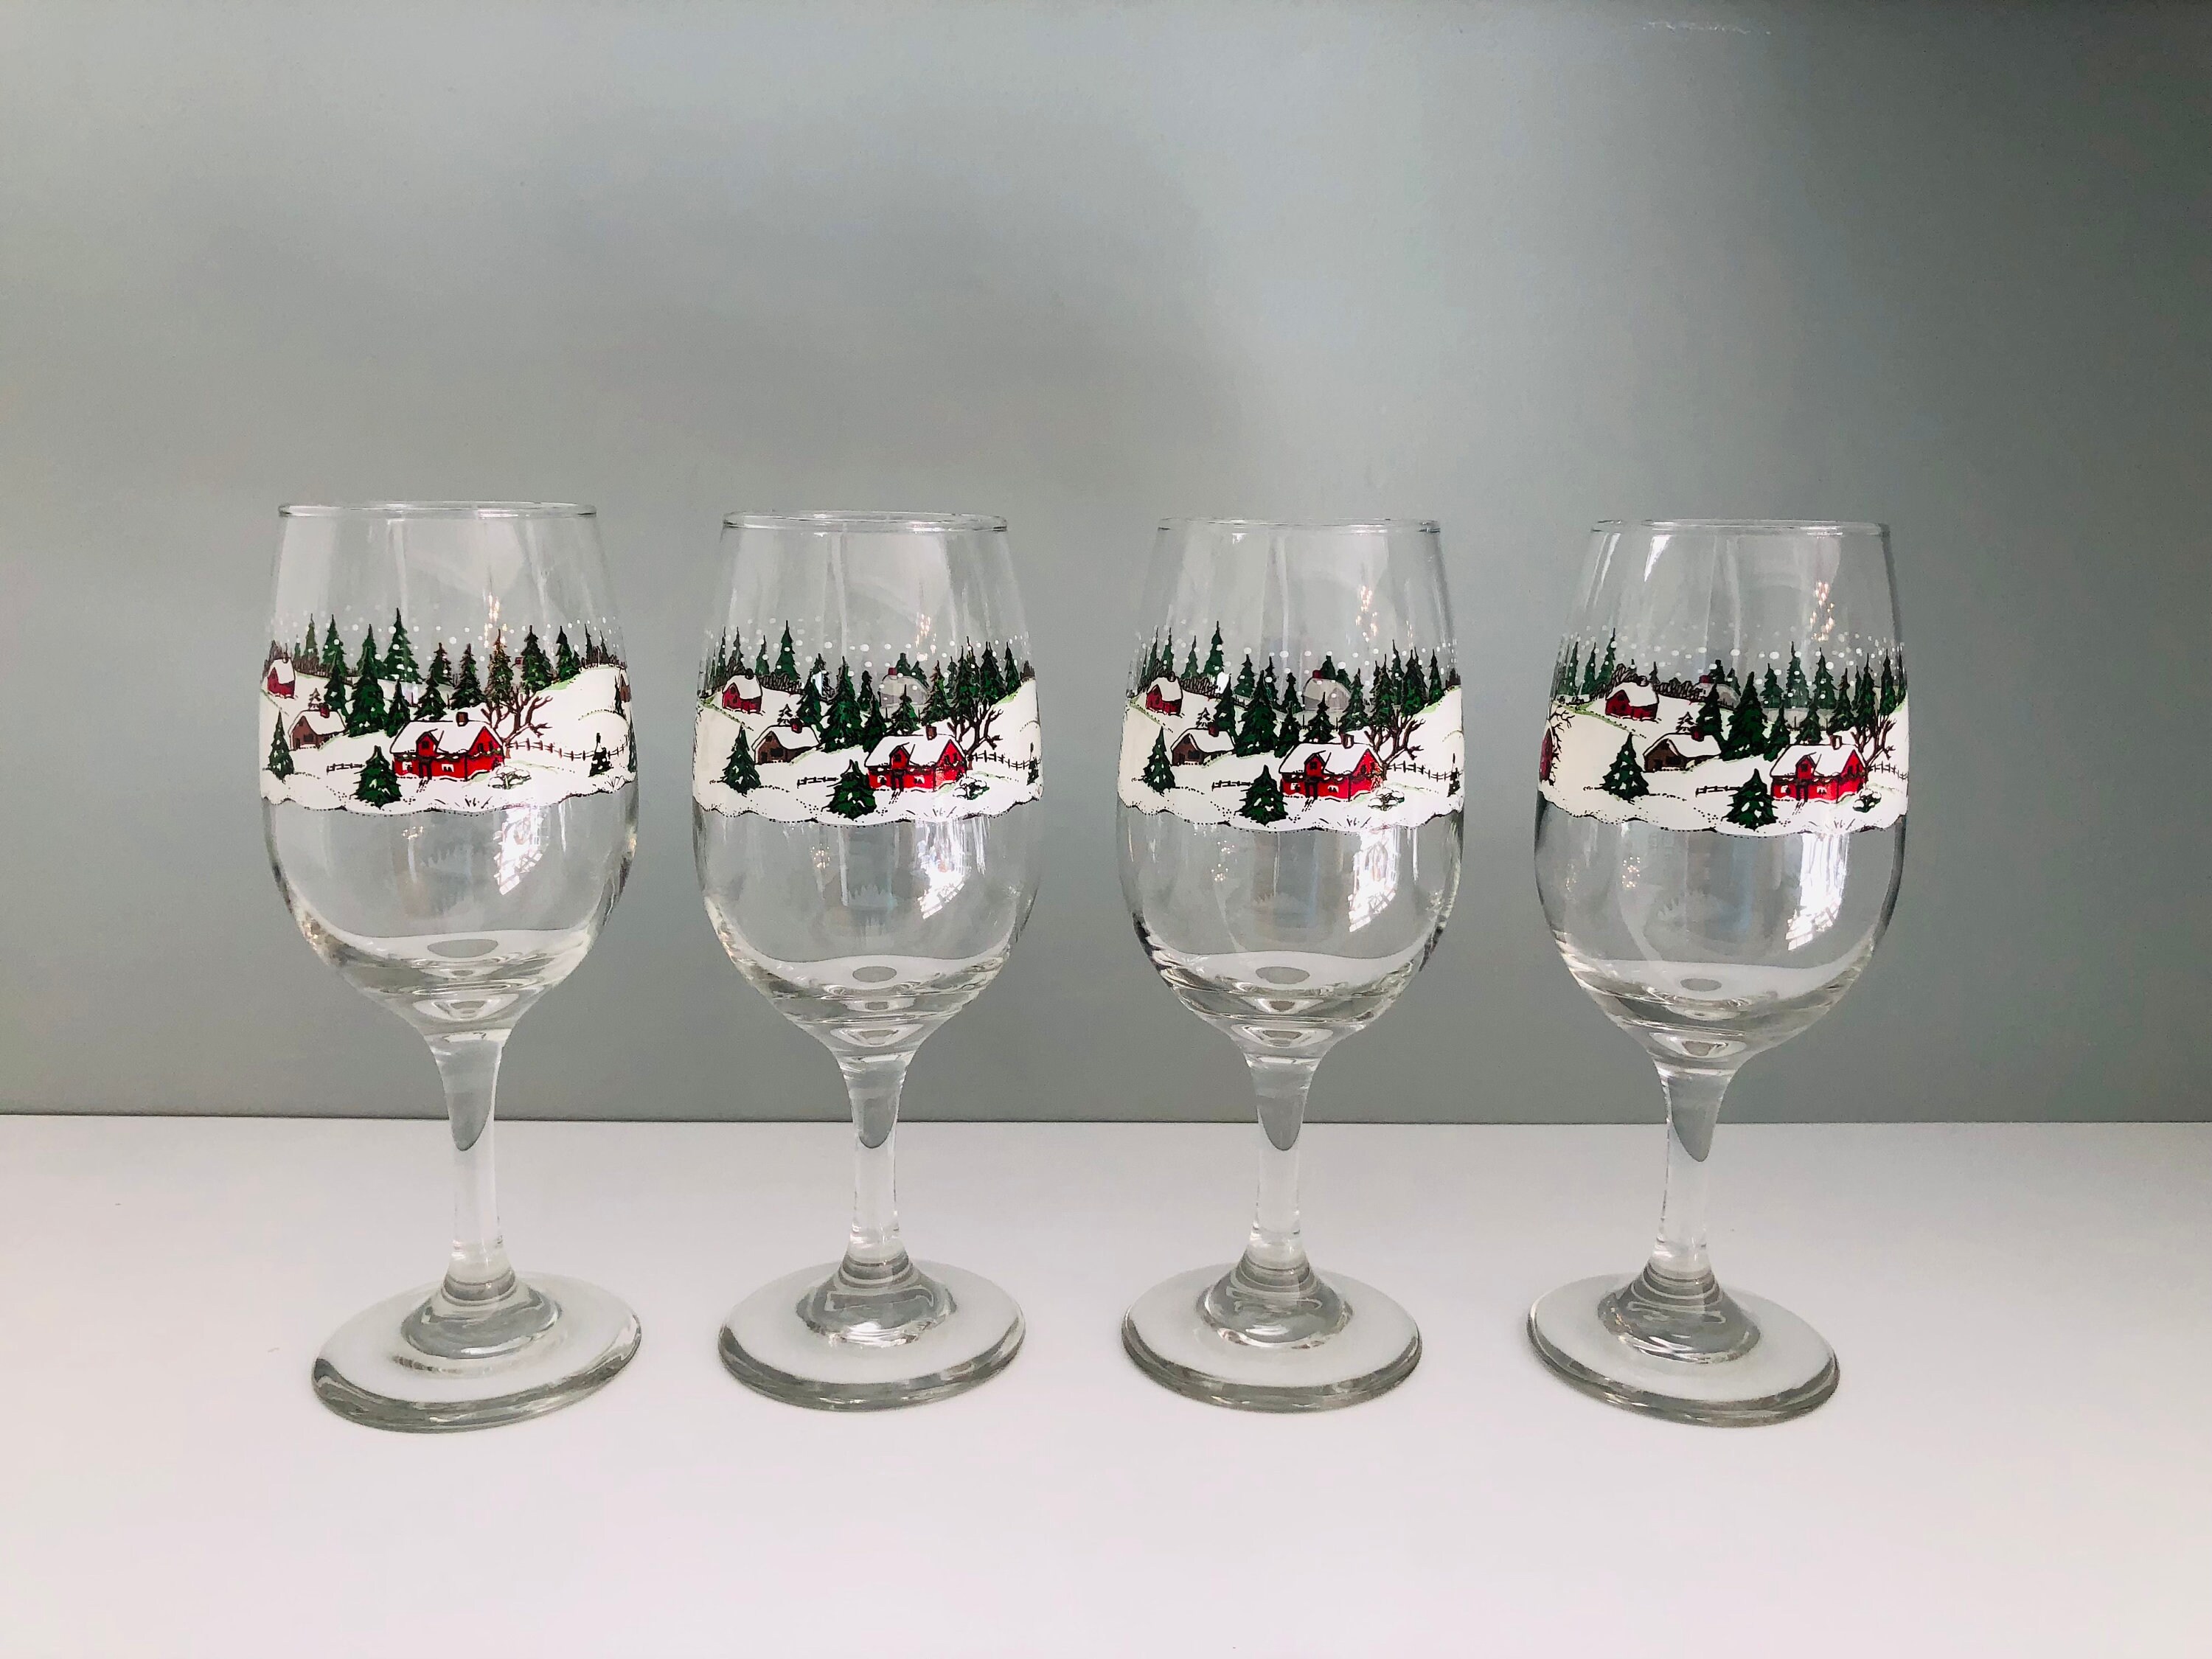 Details about   1950's Libbey Currier & Ives Winter Village Christmas Wine Glasses Goblets 4